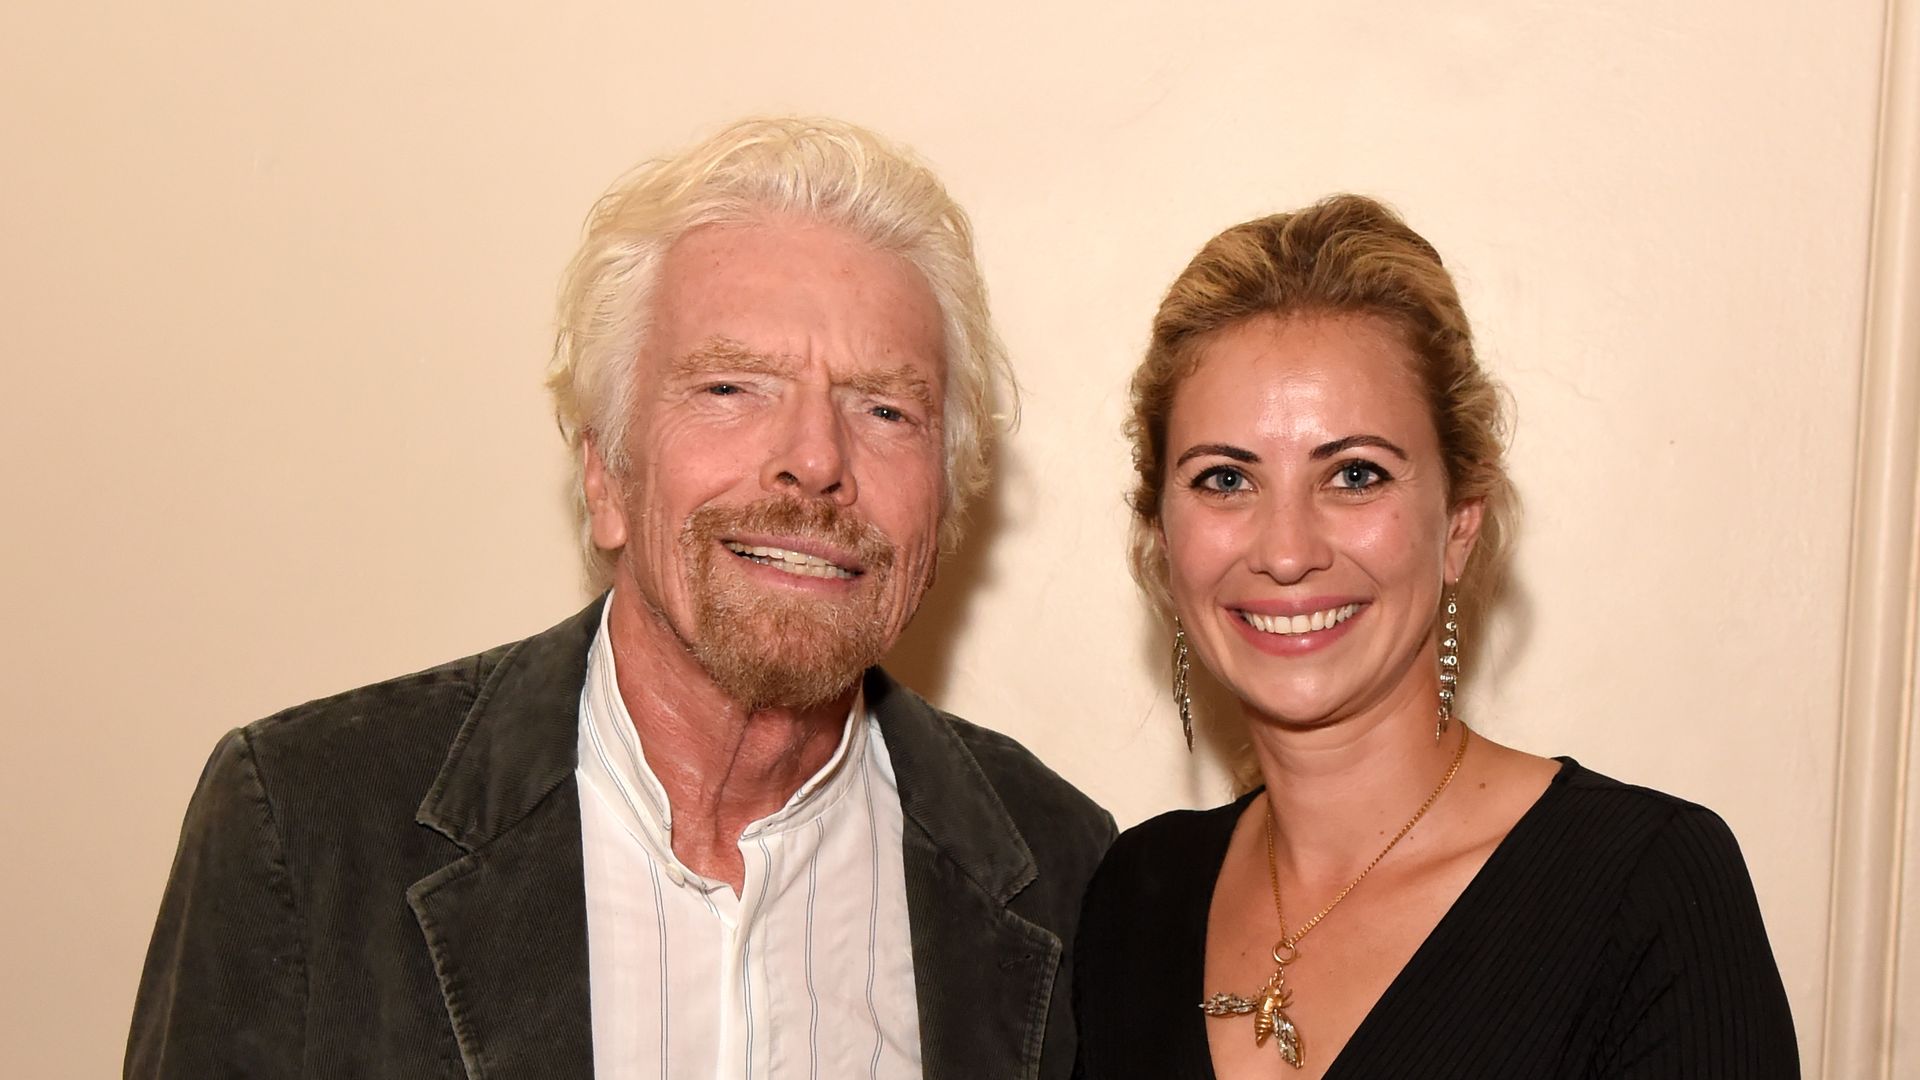 Richard Branson and Holly Branson attend the Virgin Voyages and Gareth Pugh collaboration launch party at The Royal Opera House on September 15, 2019 in London, England.